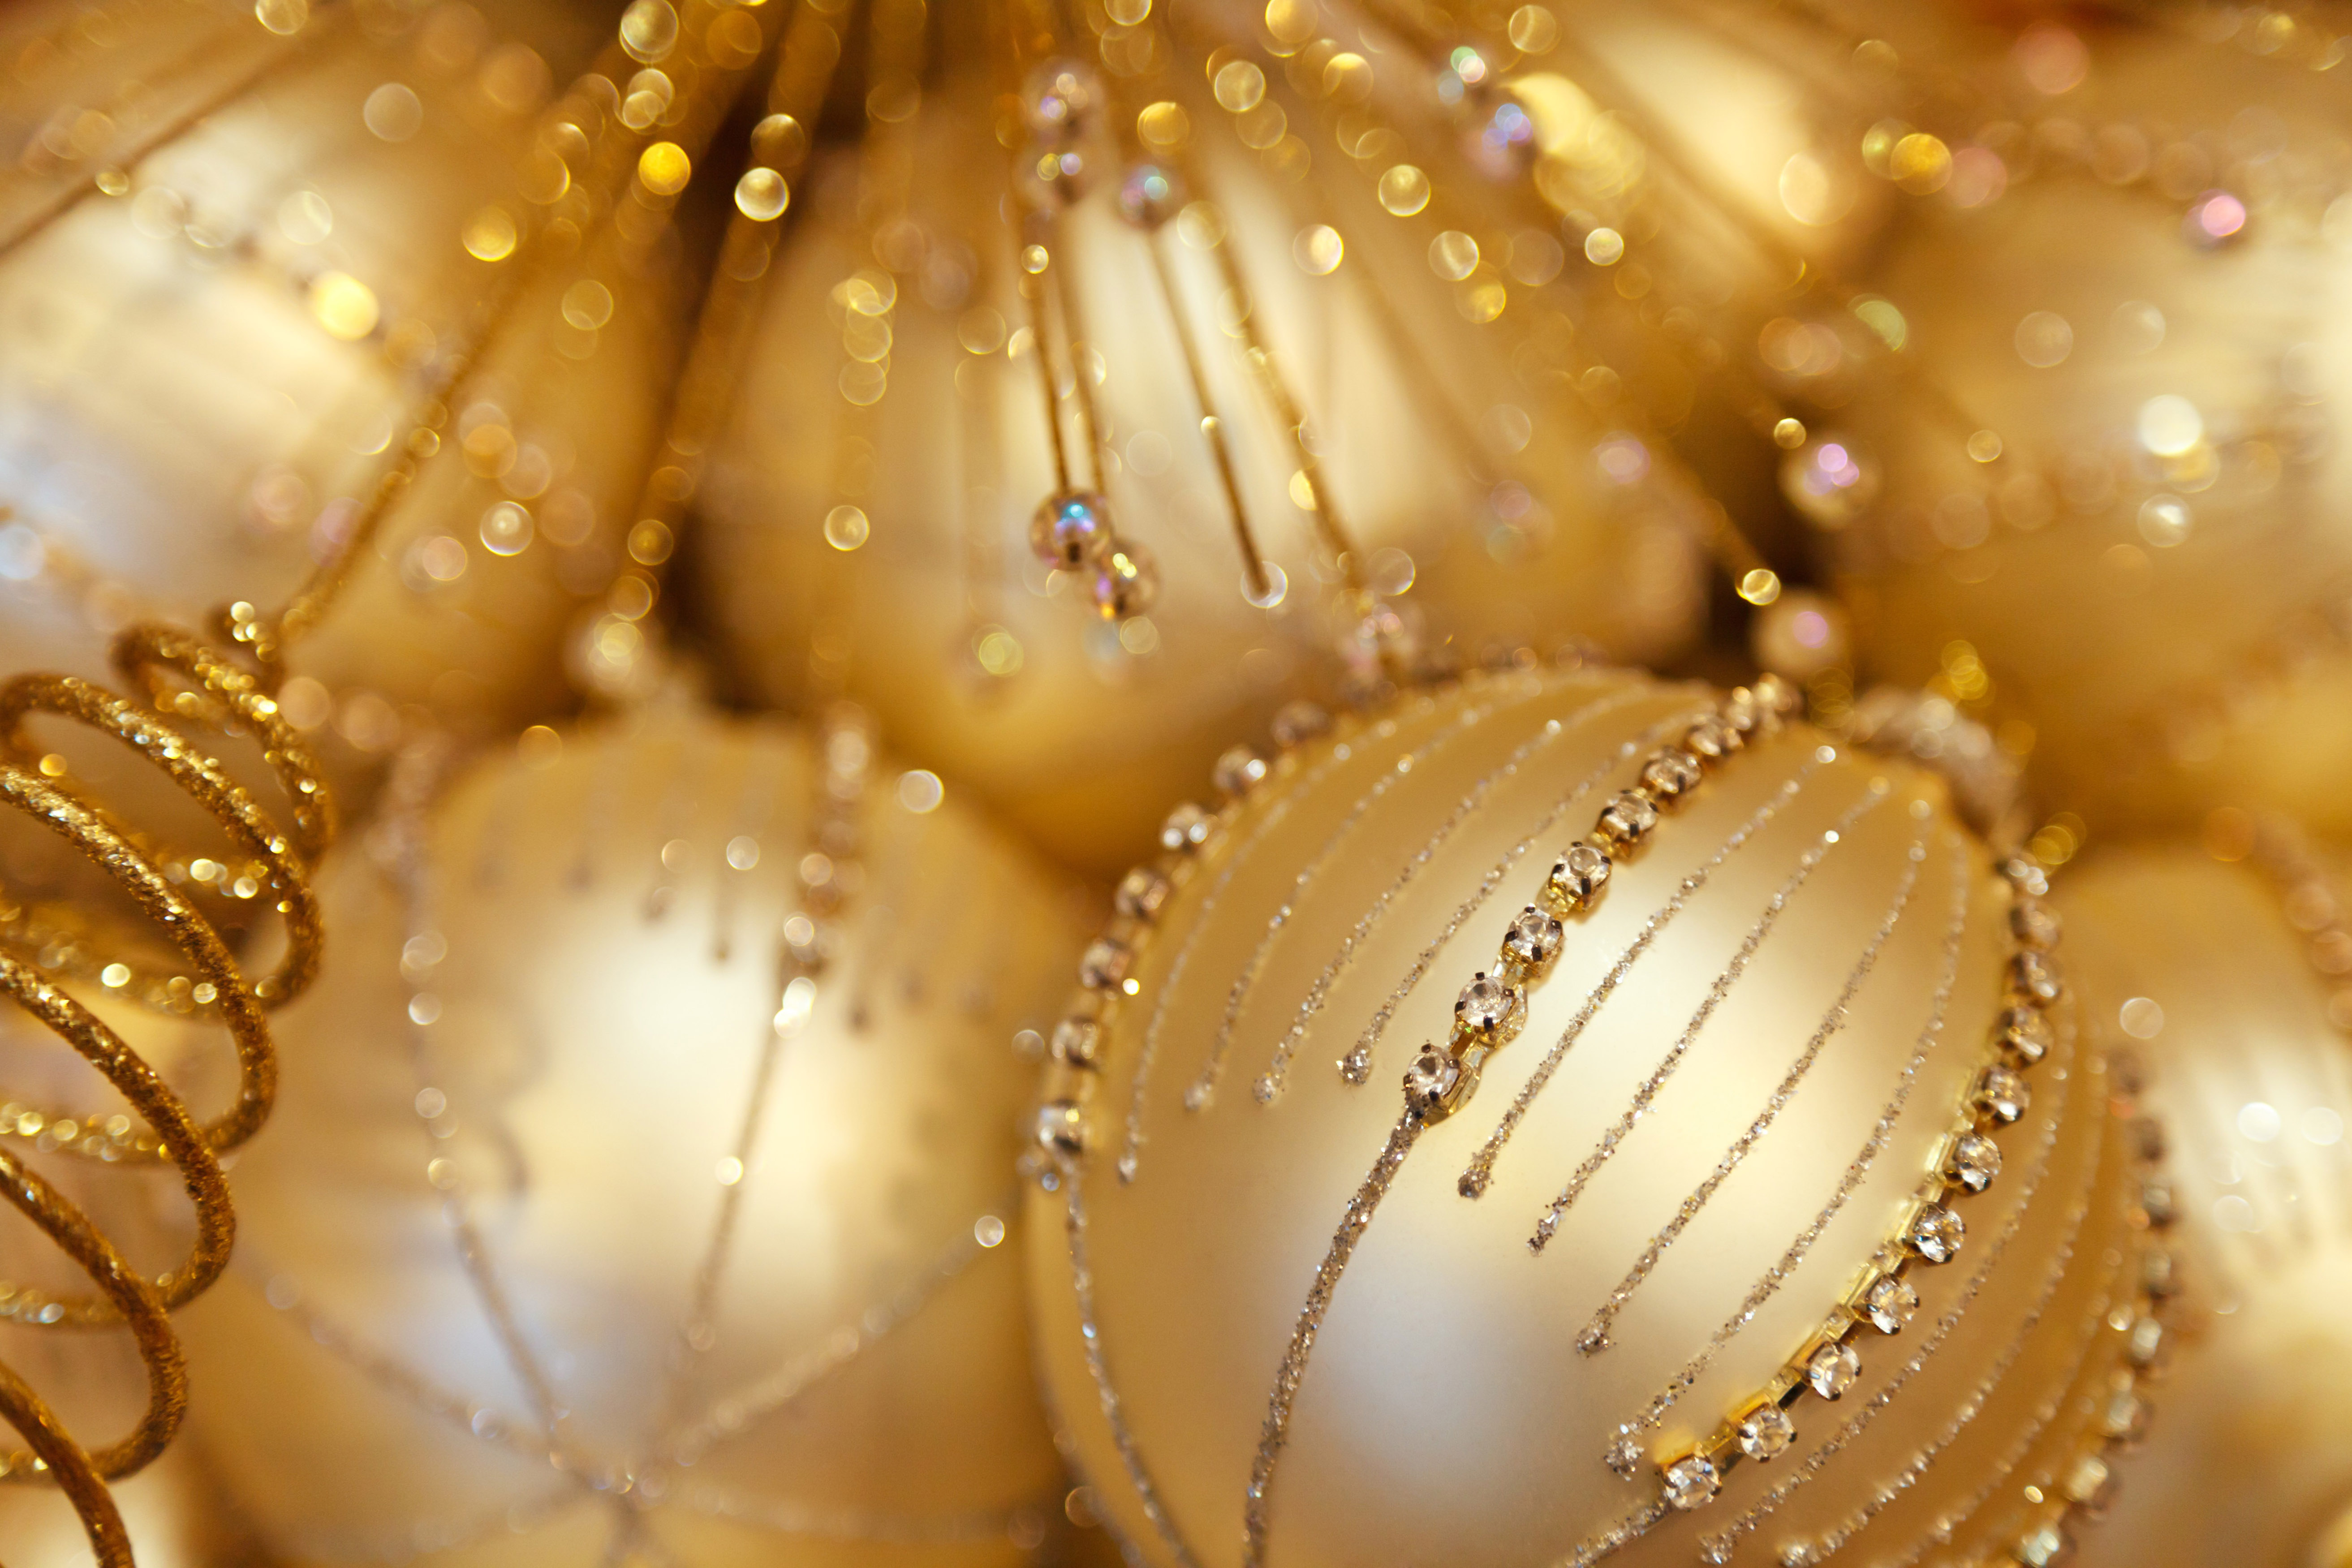 20 More Ball Decoration for a Free Christmas Wallpaper and Christmas ...